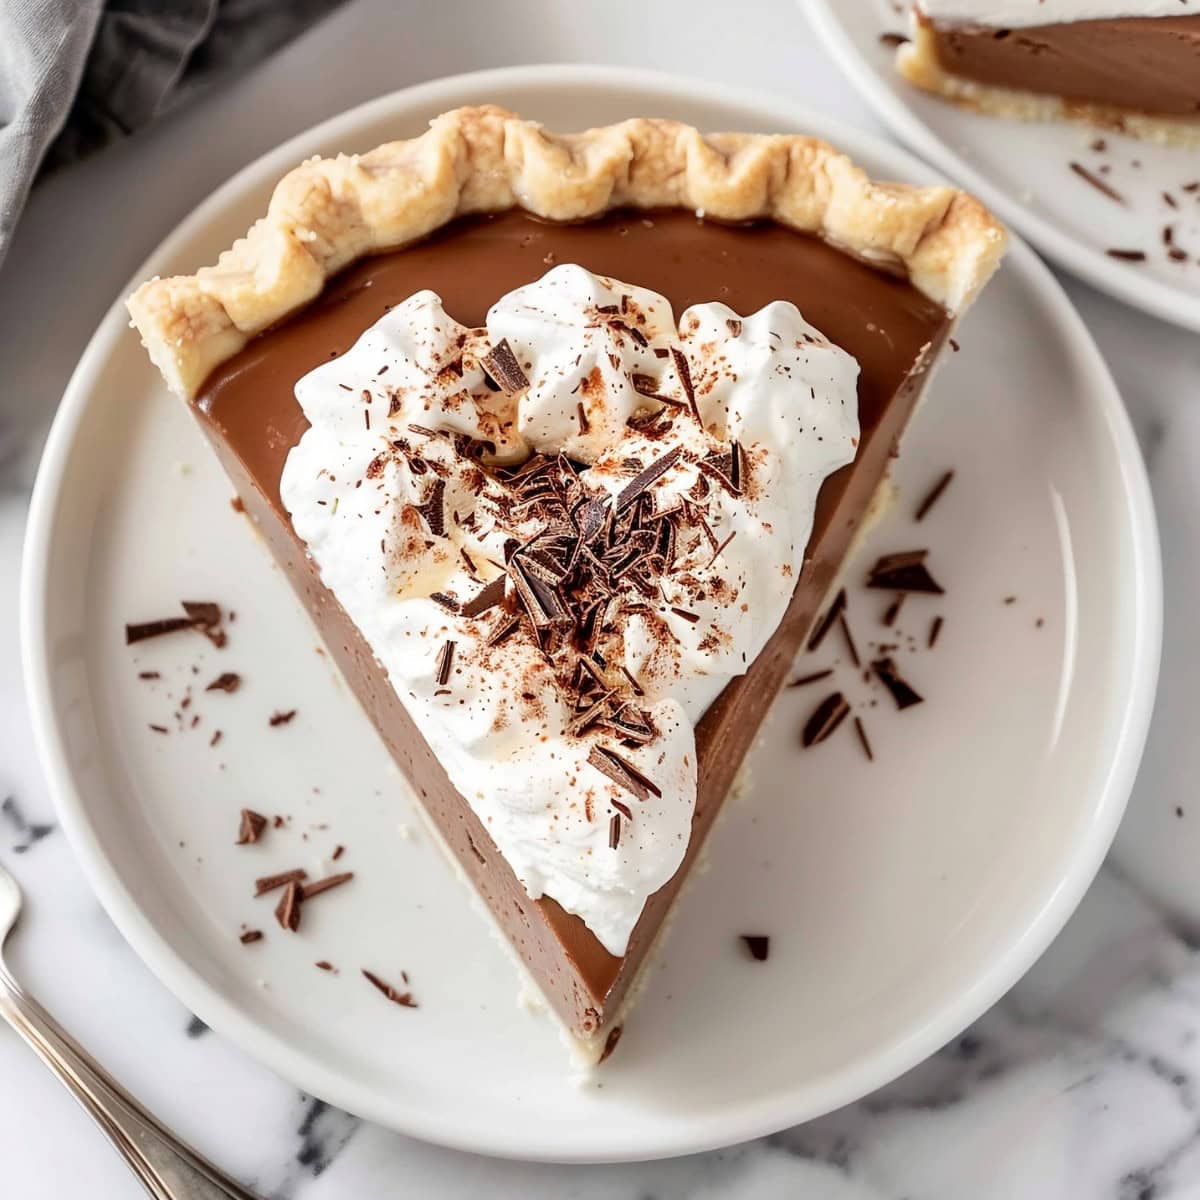 Comforting French silk pie, a delightful dessert that brings joy with its rich chocolate flavor